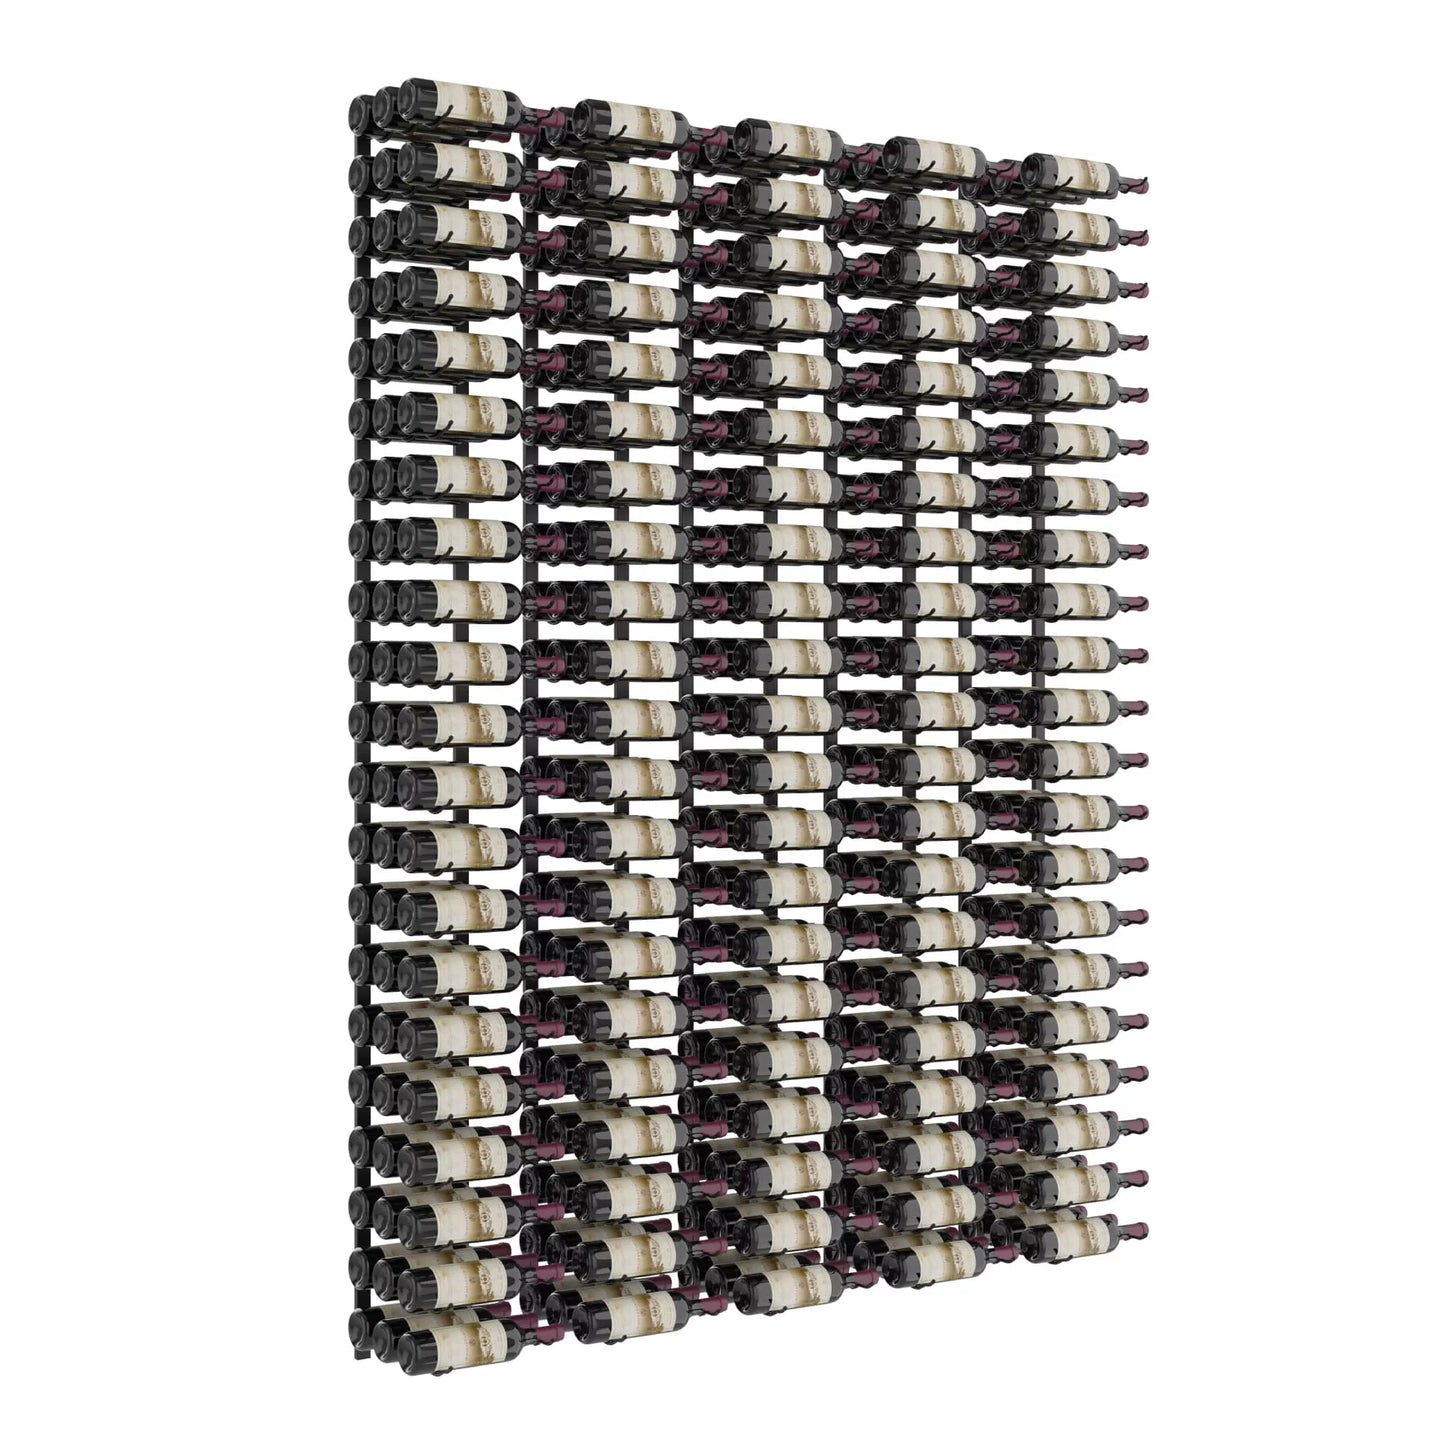 W Series Feature Wall 7 Wall Mounted Metal Wine Rack Kit